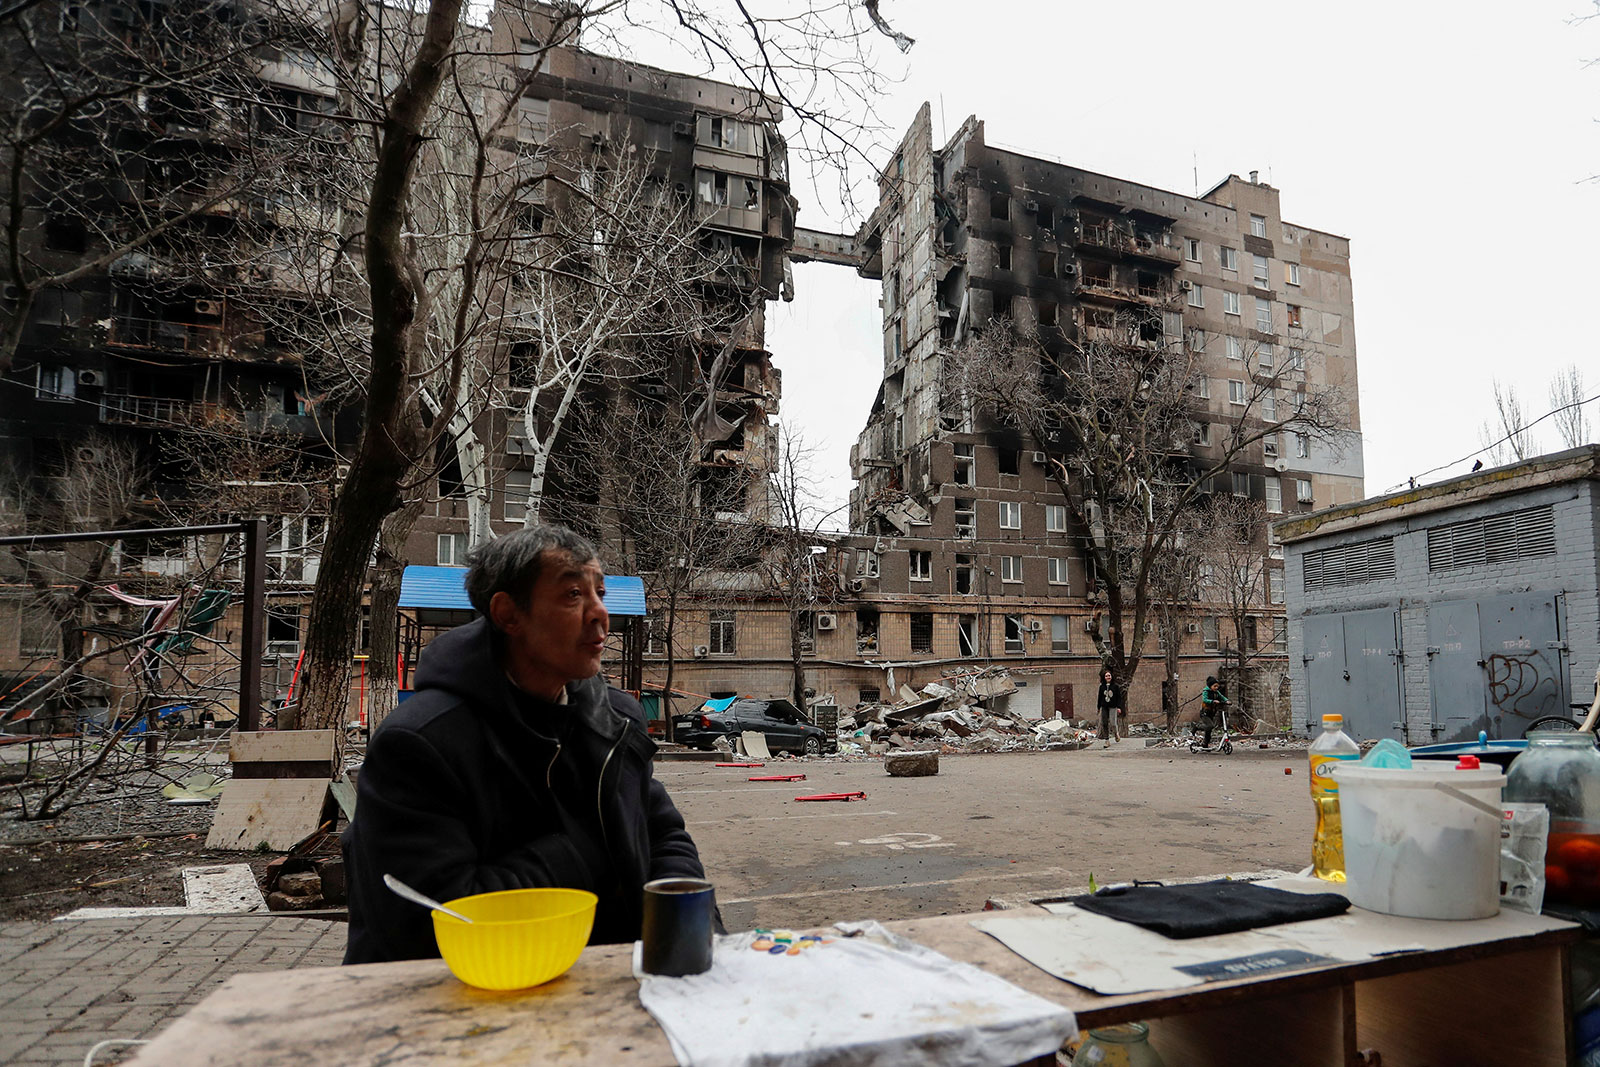 A local resident sits by a fire in the courtyard outside a damaged building in Mariupol, Ukraine, April 14.